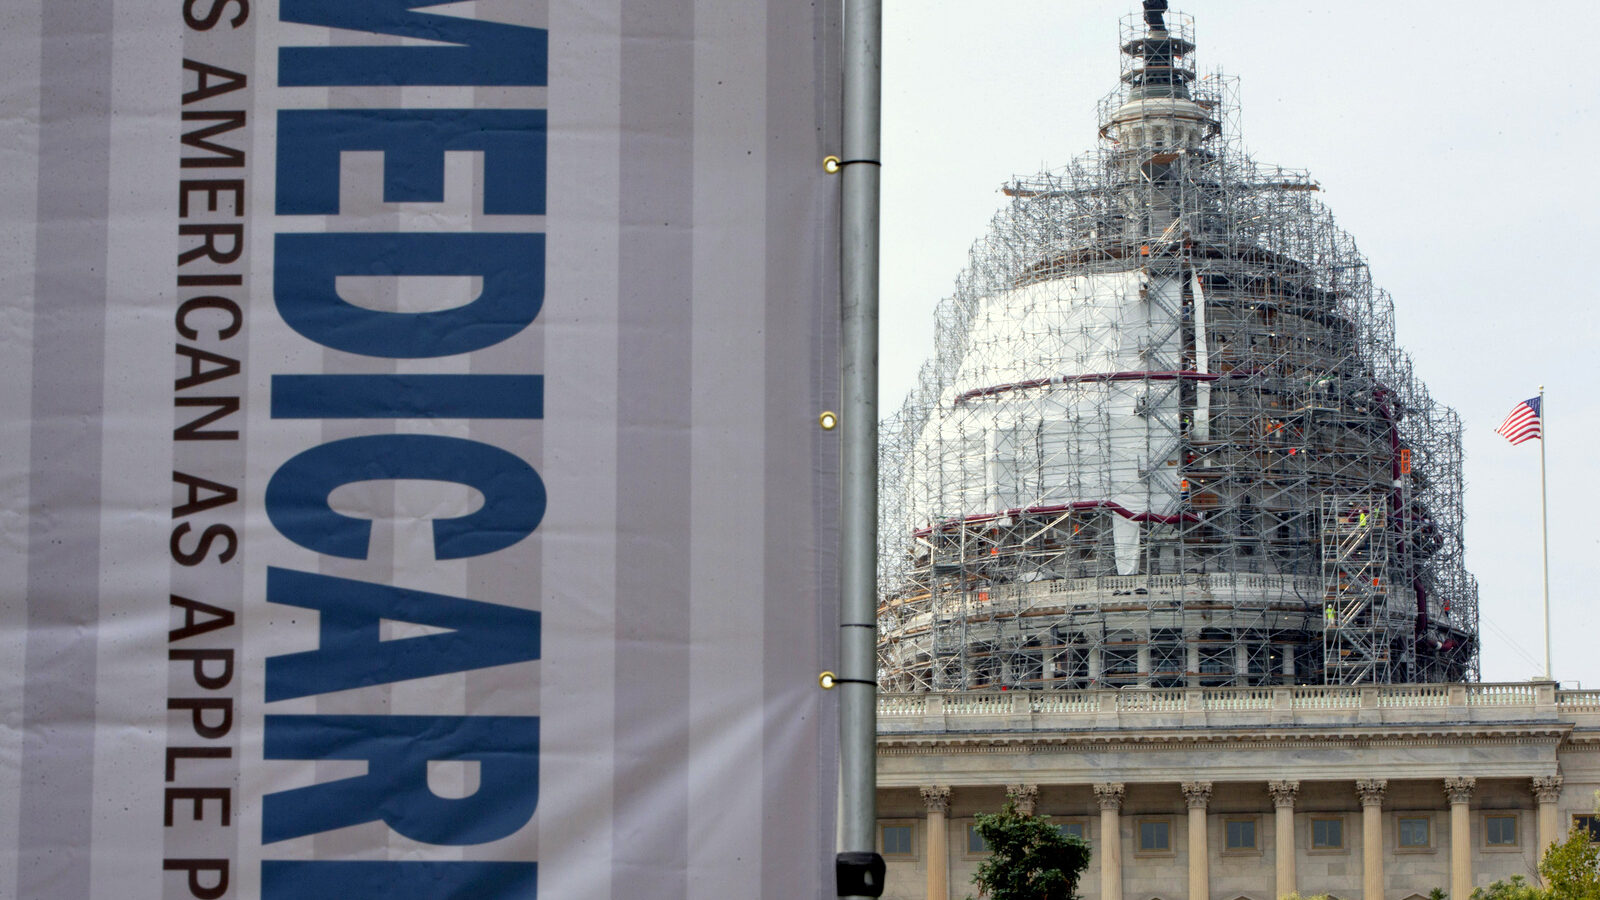 A sign supporting Medicare is seen on Capitol Hill in Washington on Friday, Oct. 14, 2016. (AP/Jacquelyn Martin)